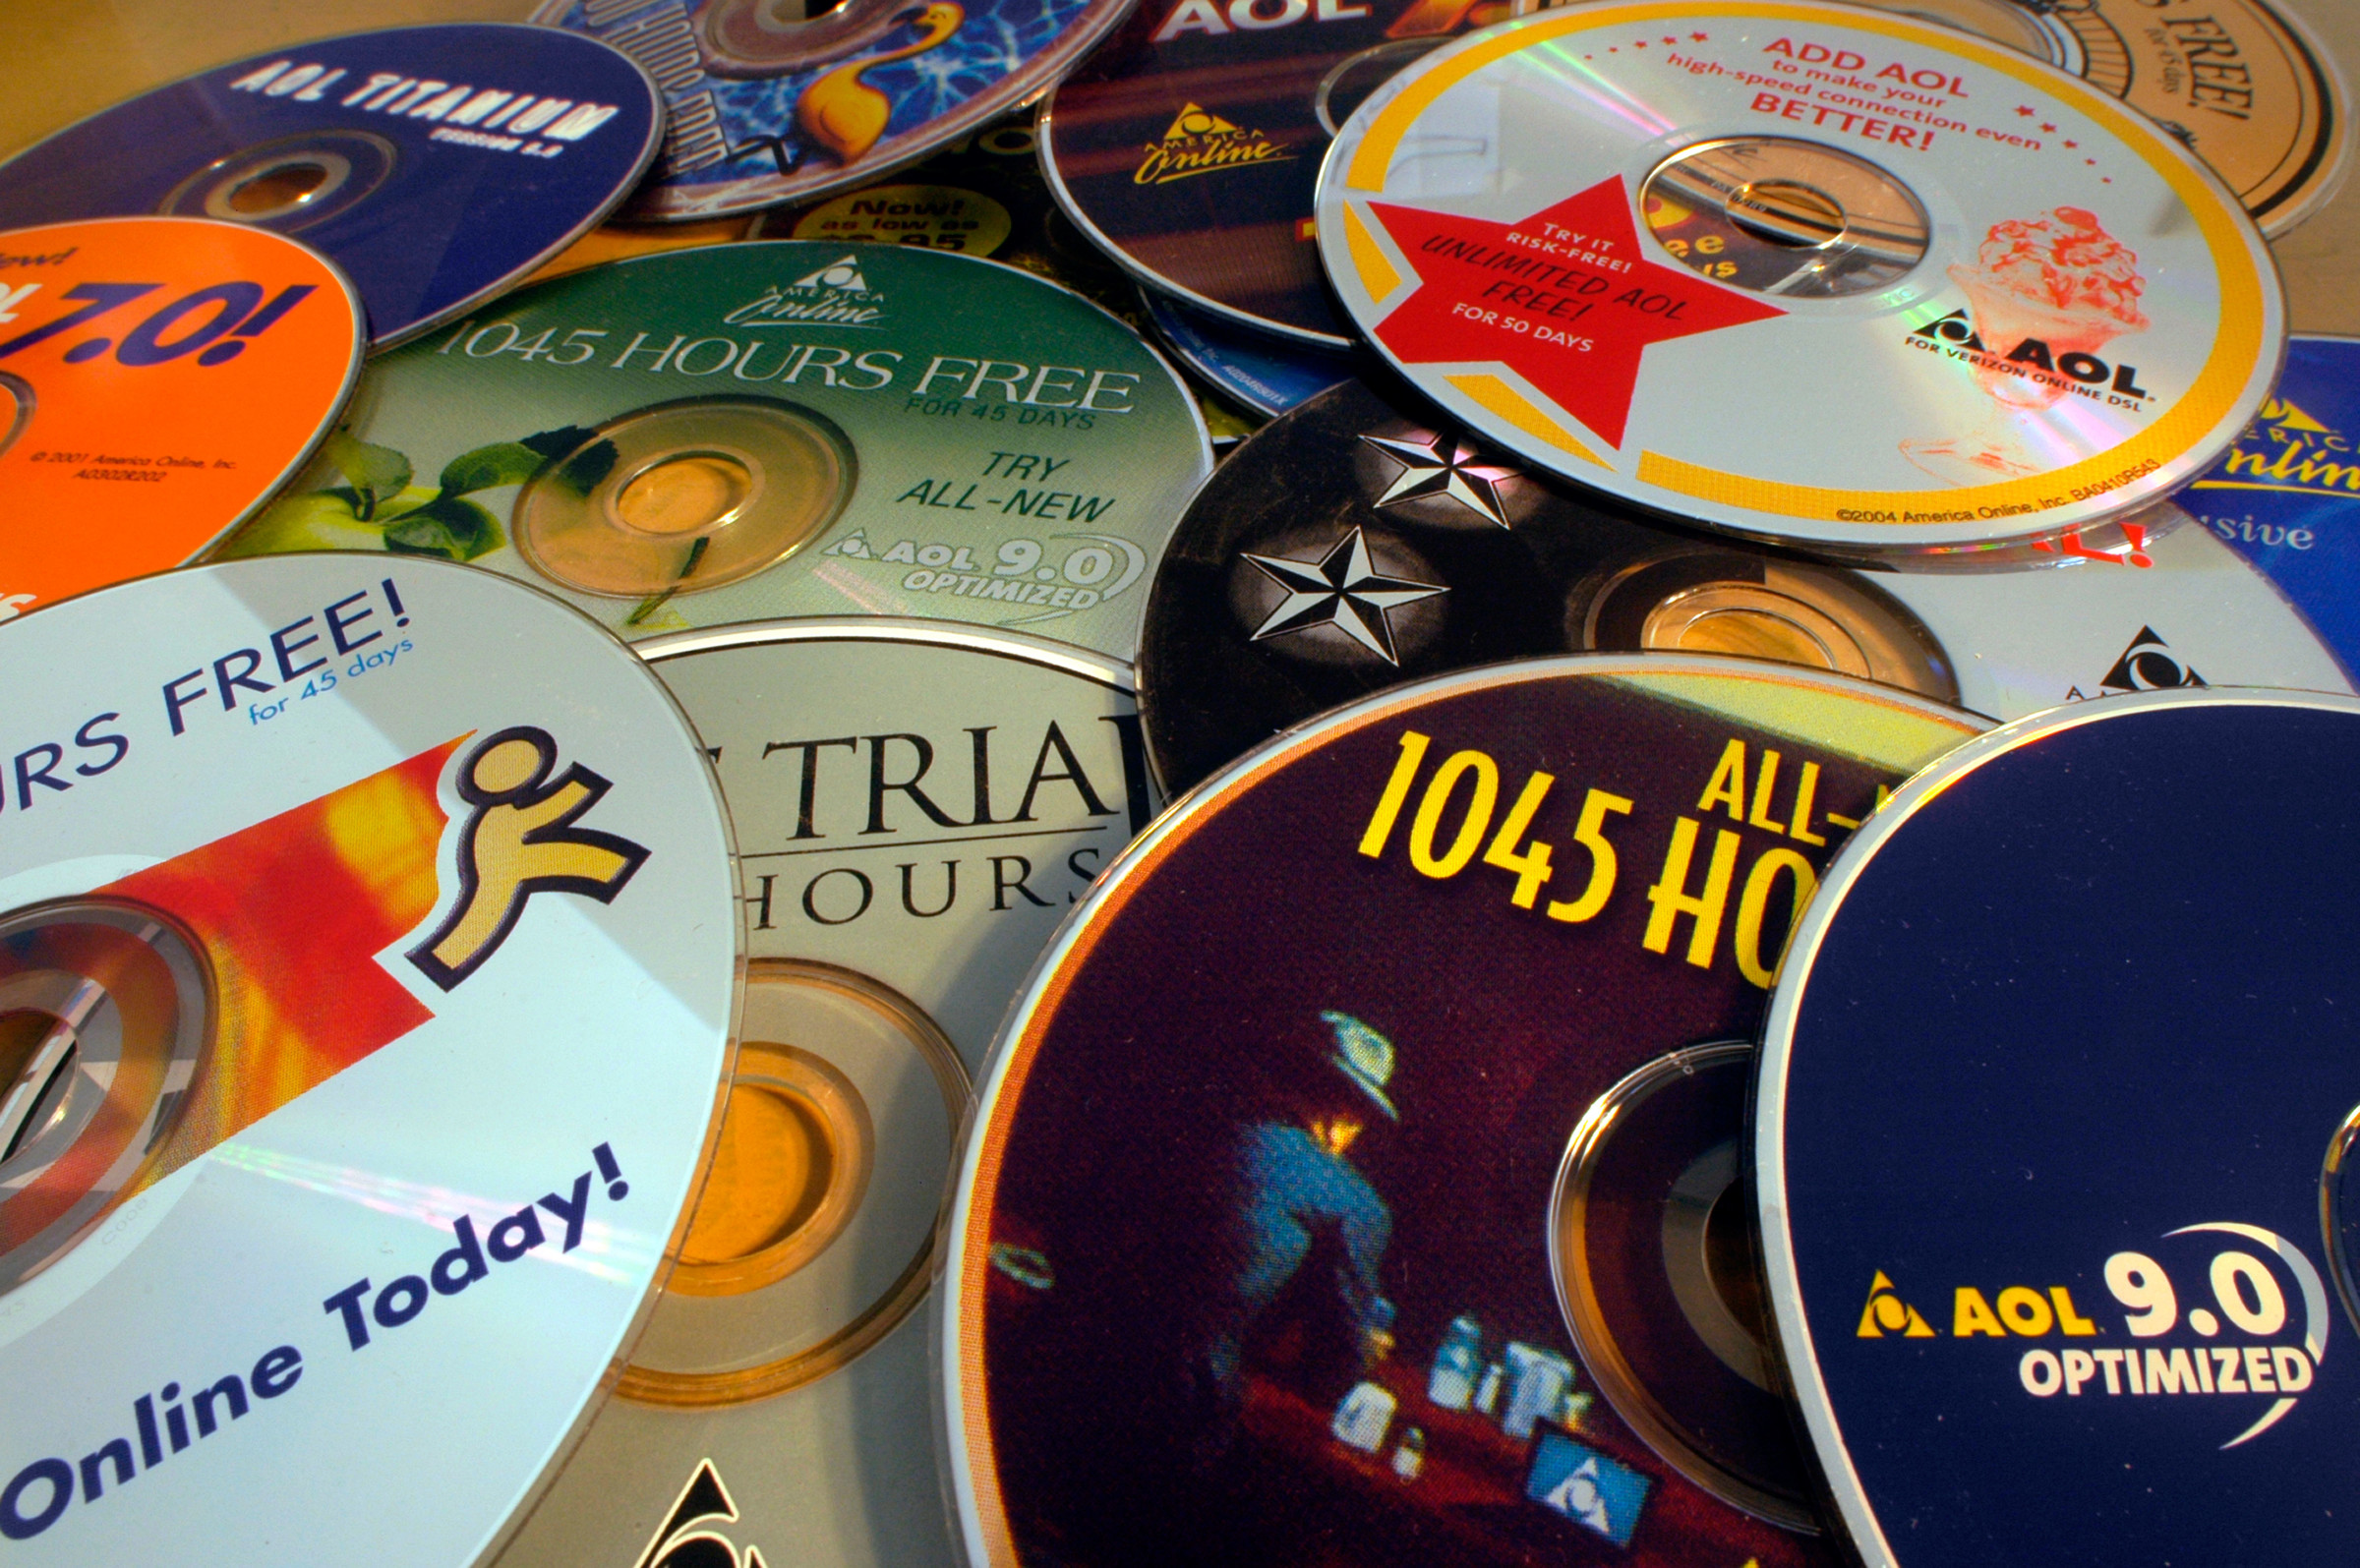 A pile of various AOL software CDs